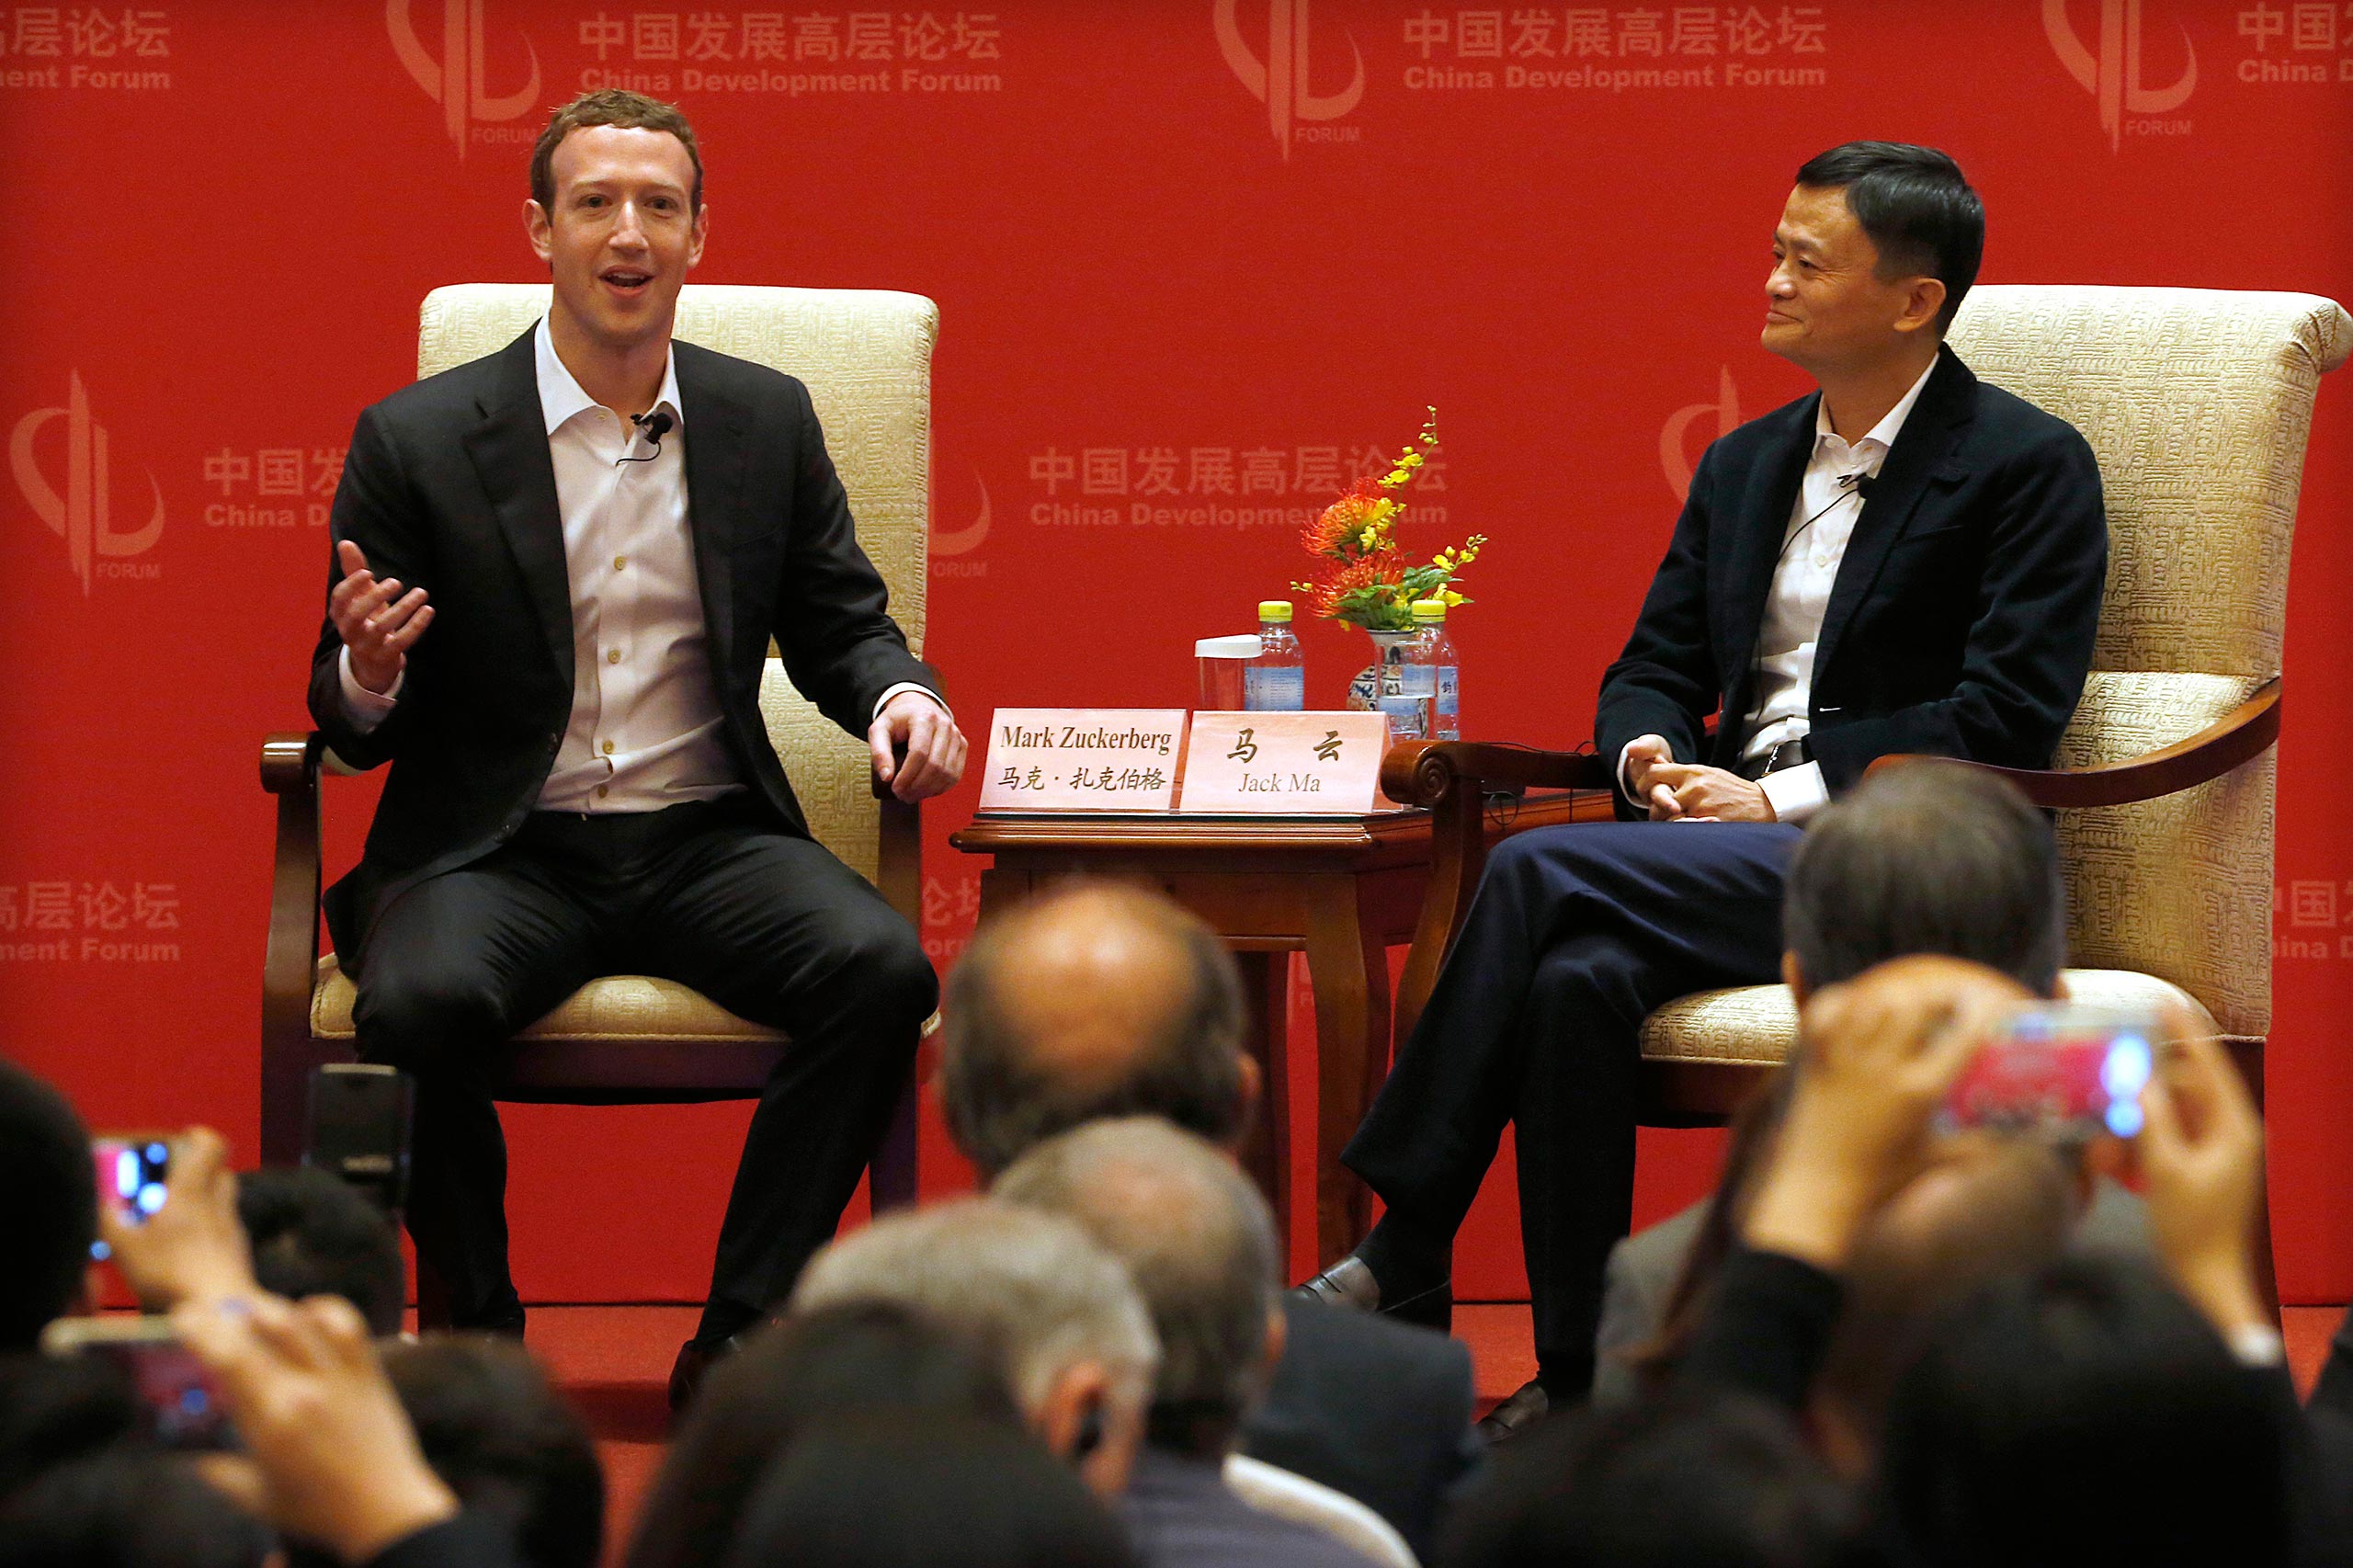 Facebook CEO Mark Zuckerberg speaks as Jack Ma, executive chairman of the Alibaba Group, listens during a panel discussion held as part of the China Development Forum at the Diaoyutai State Guesthouse in Beijing on March 19, 2016 (Mark Schiefelbein—AP)